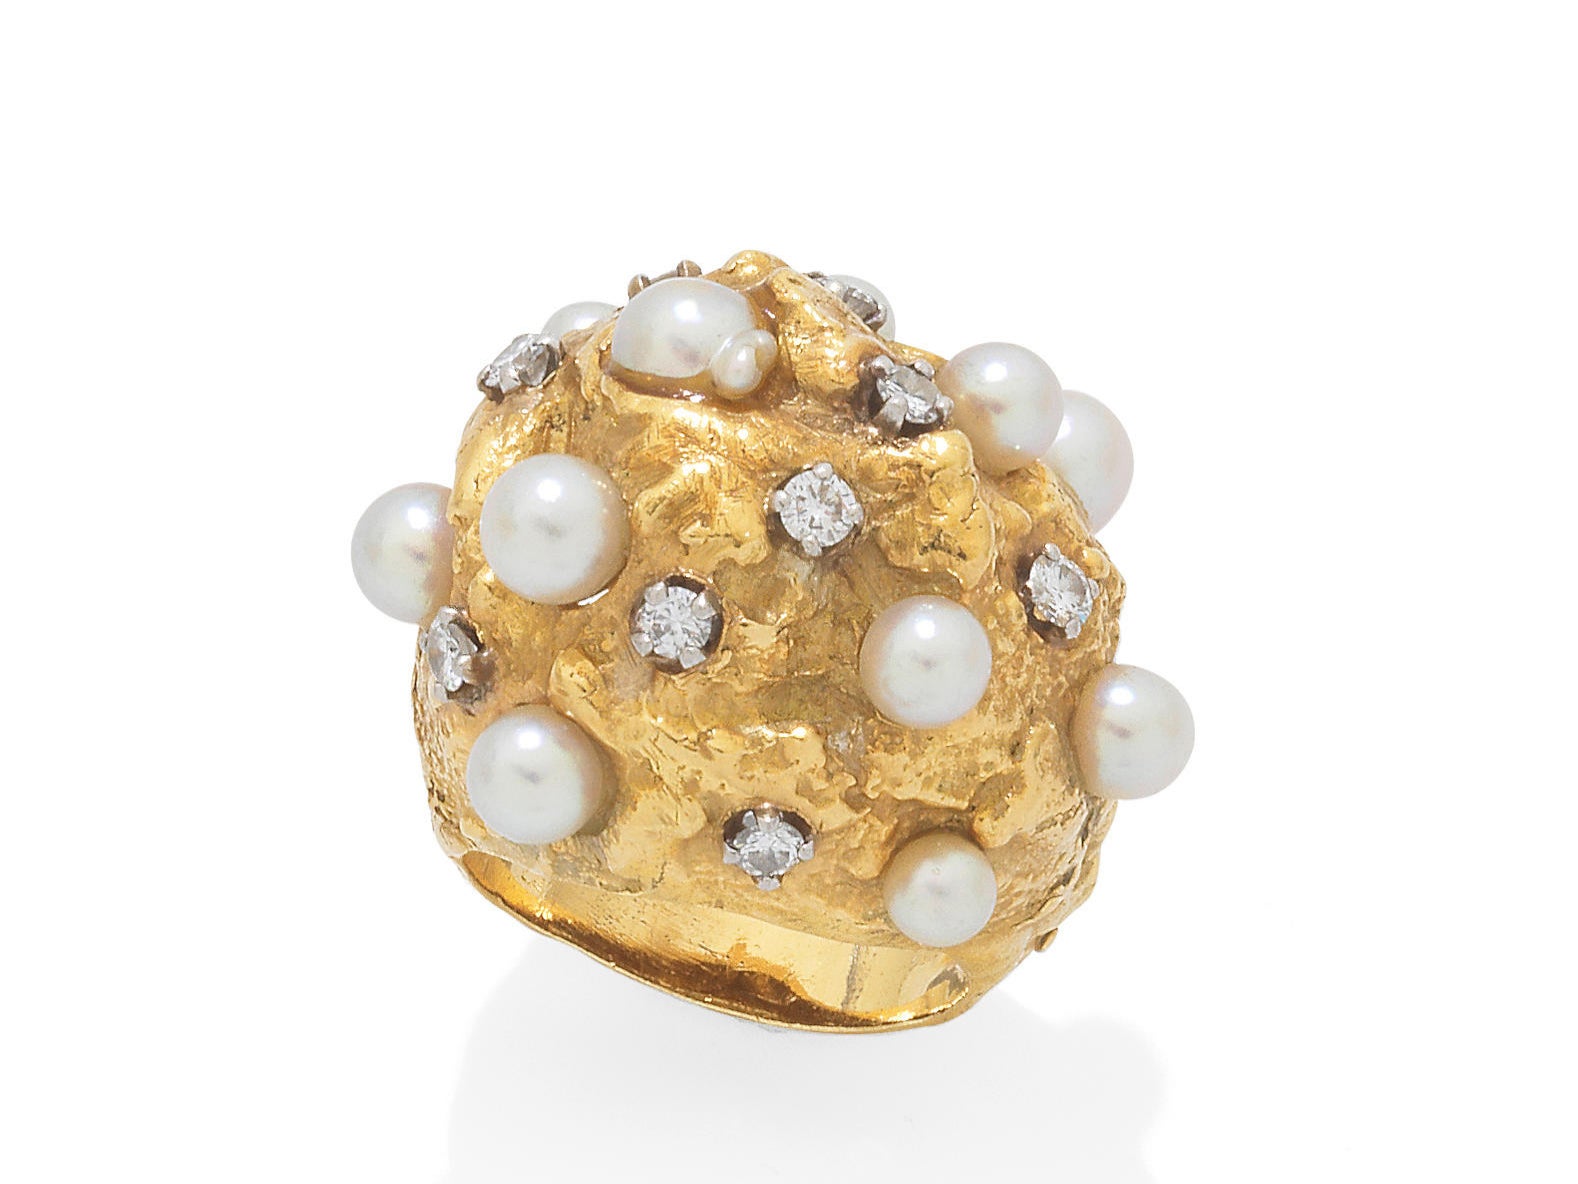 The cultured pearl and diamond encrusted ring given to Dame Joan Collins by Warren Beatty in 1960